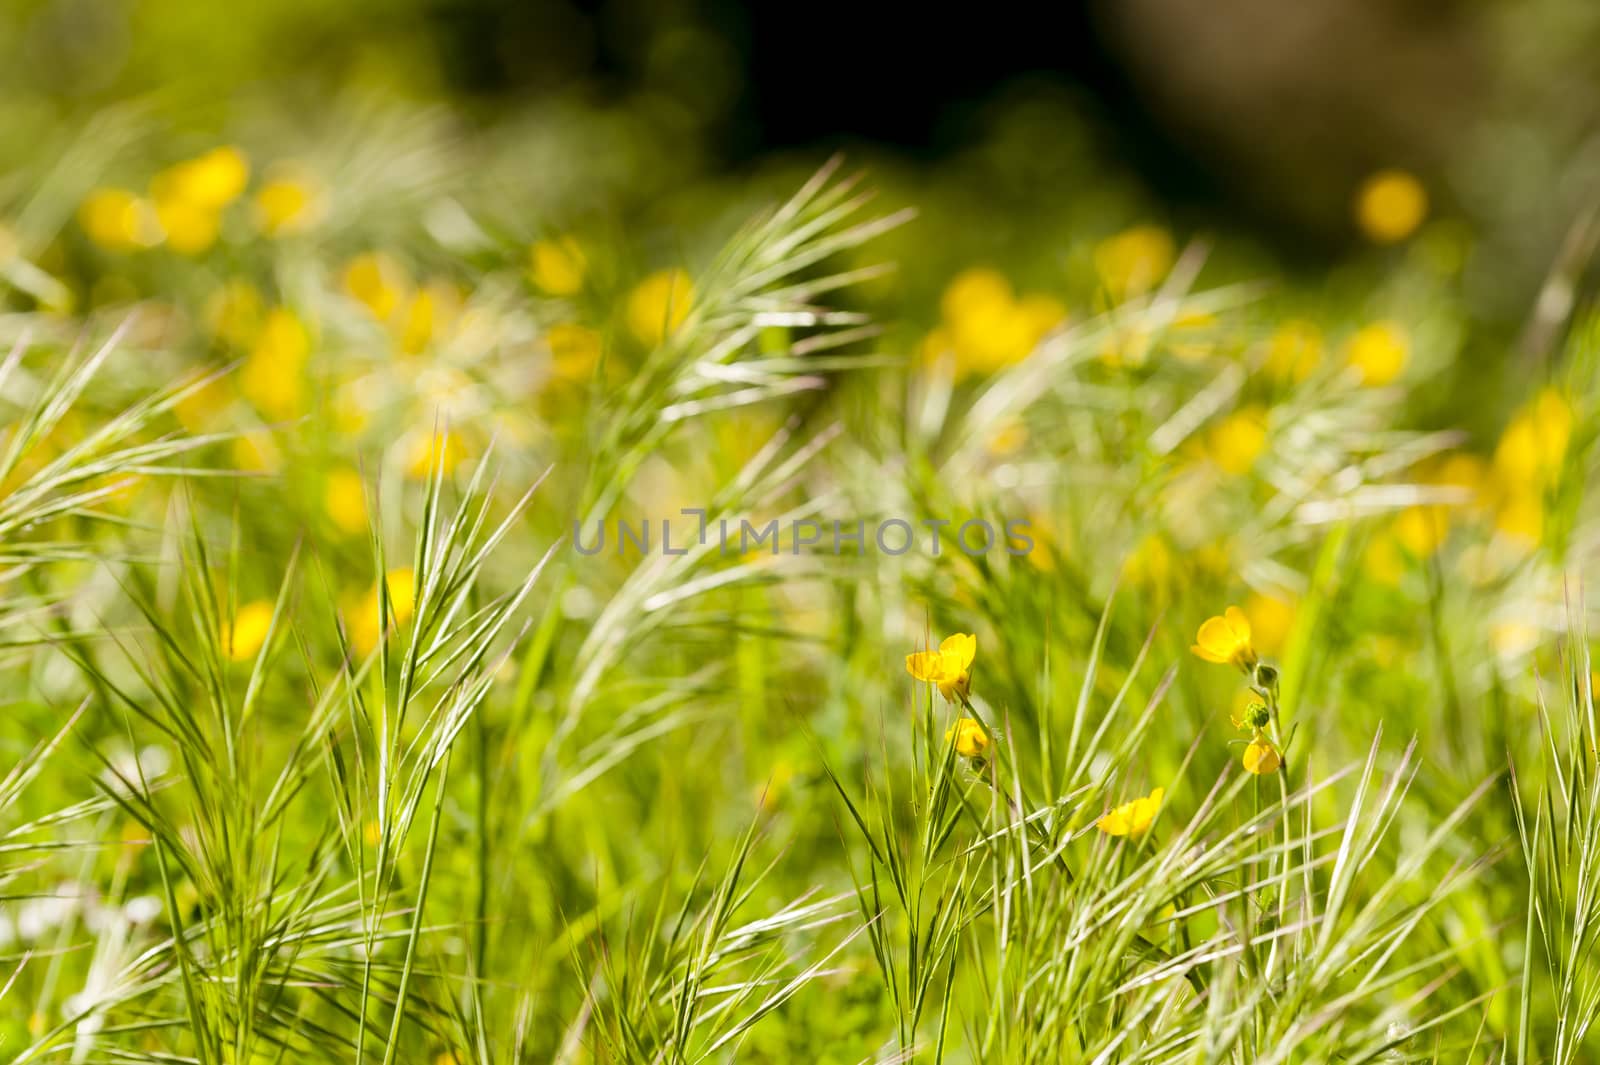 Spring bloom of yellow and white flowers in a green grass